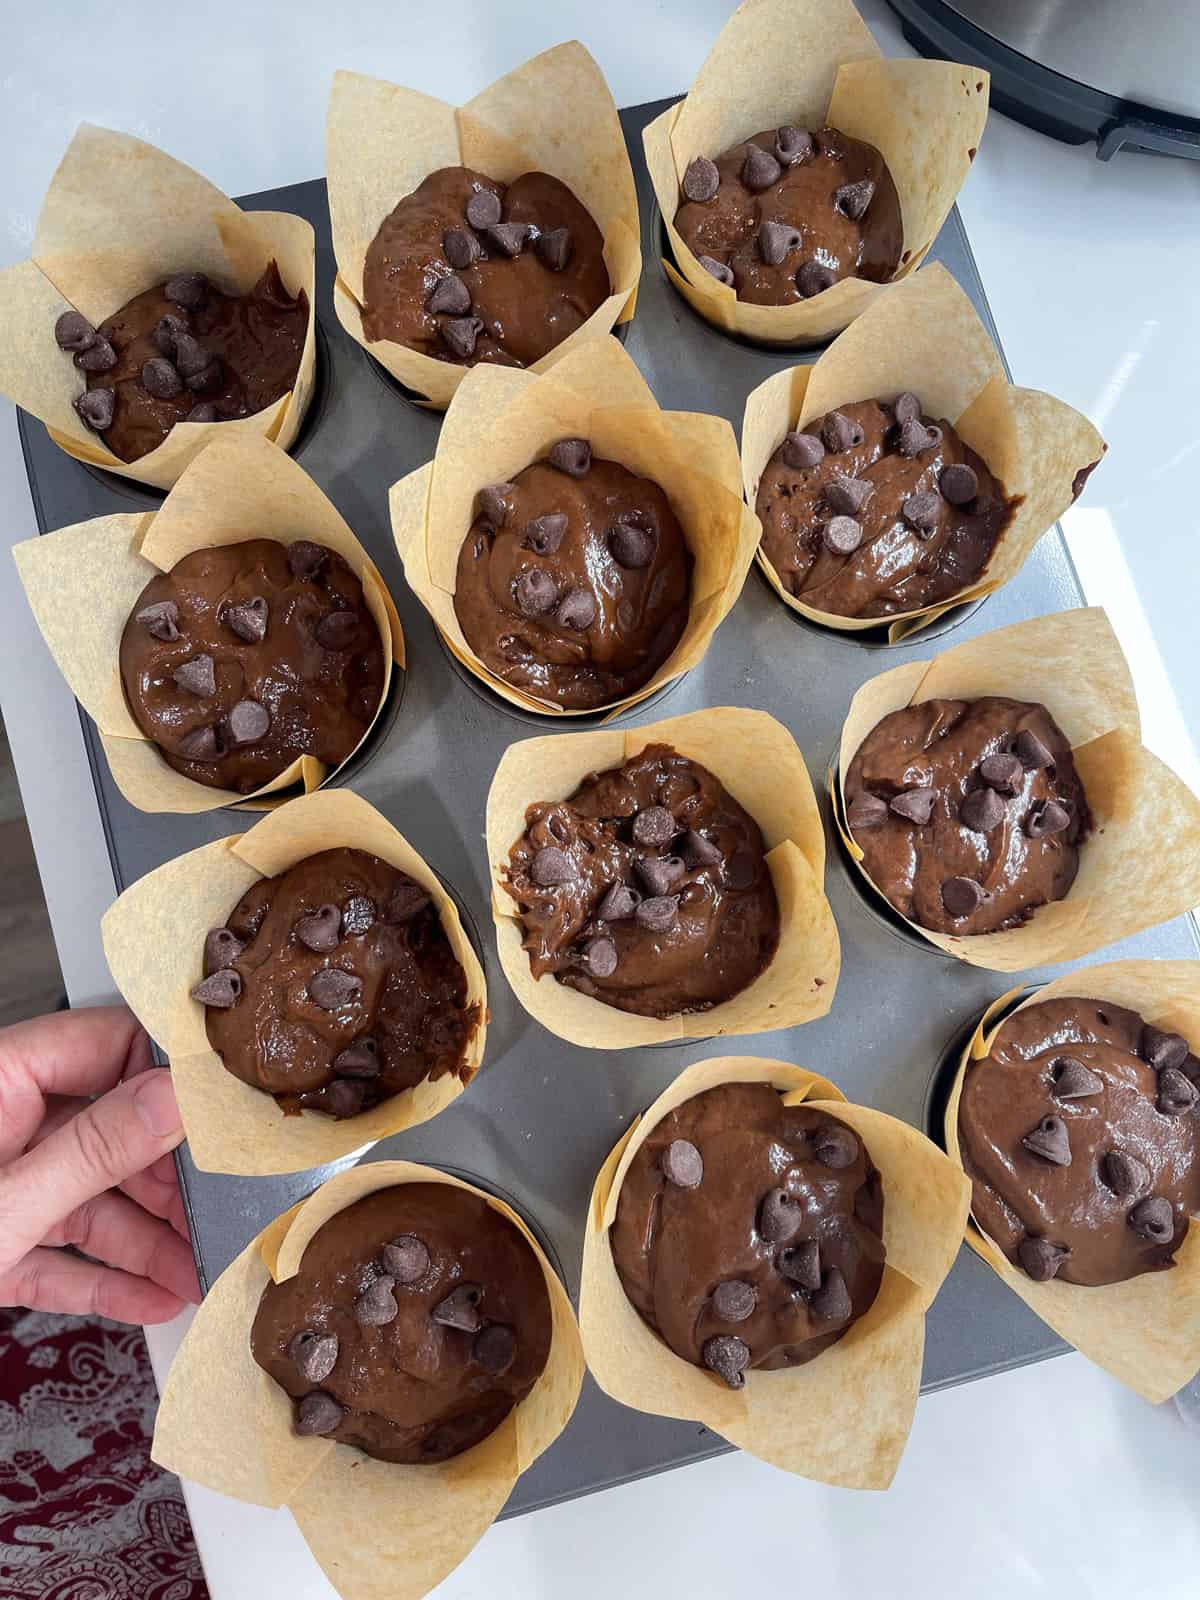 Really nice chocolate chip muffin batter in muffin cups.